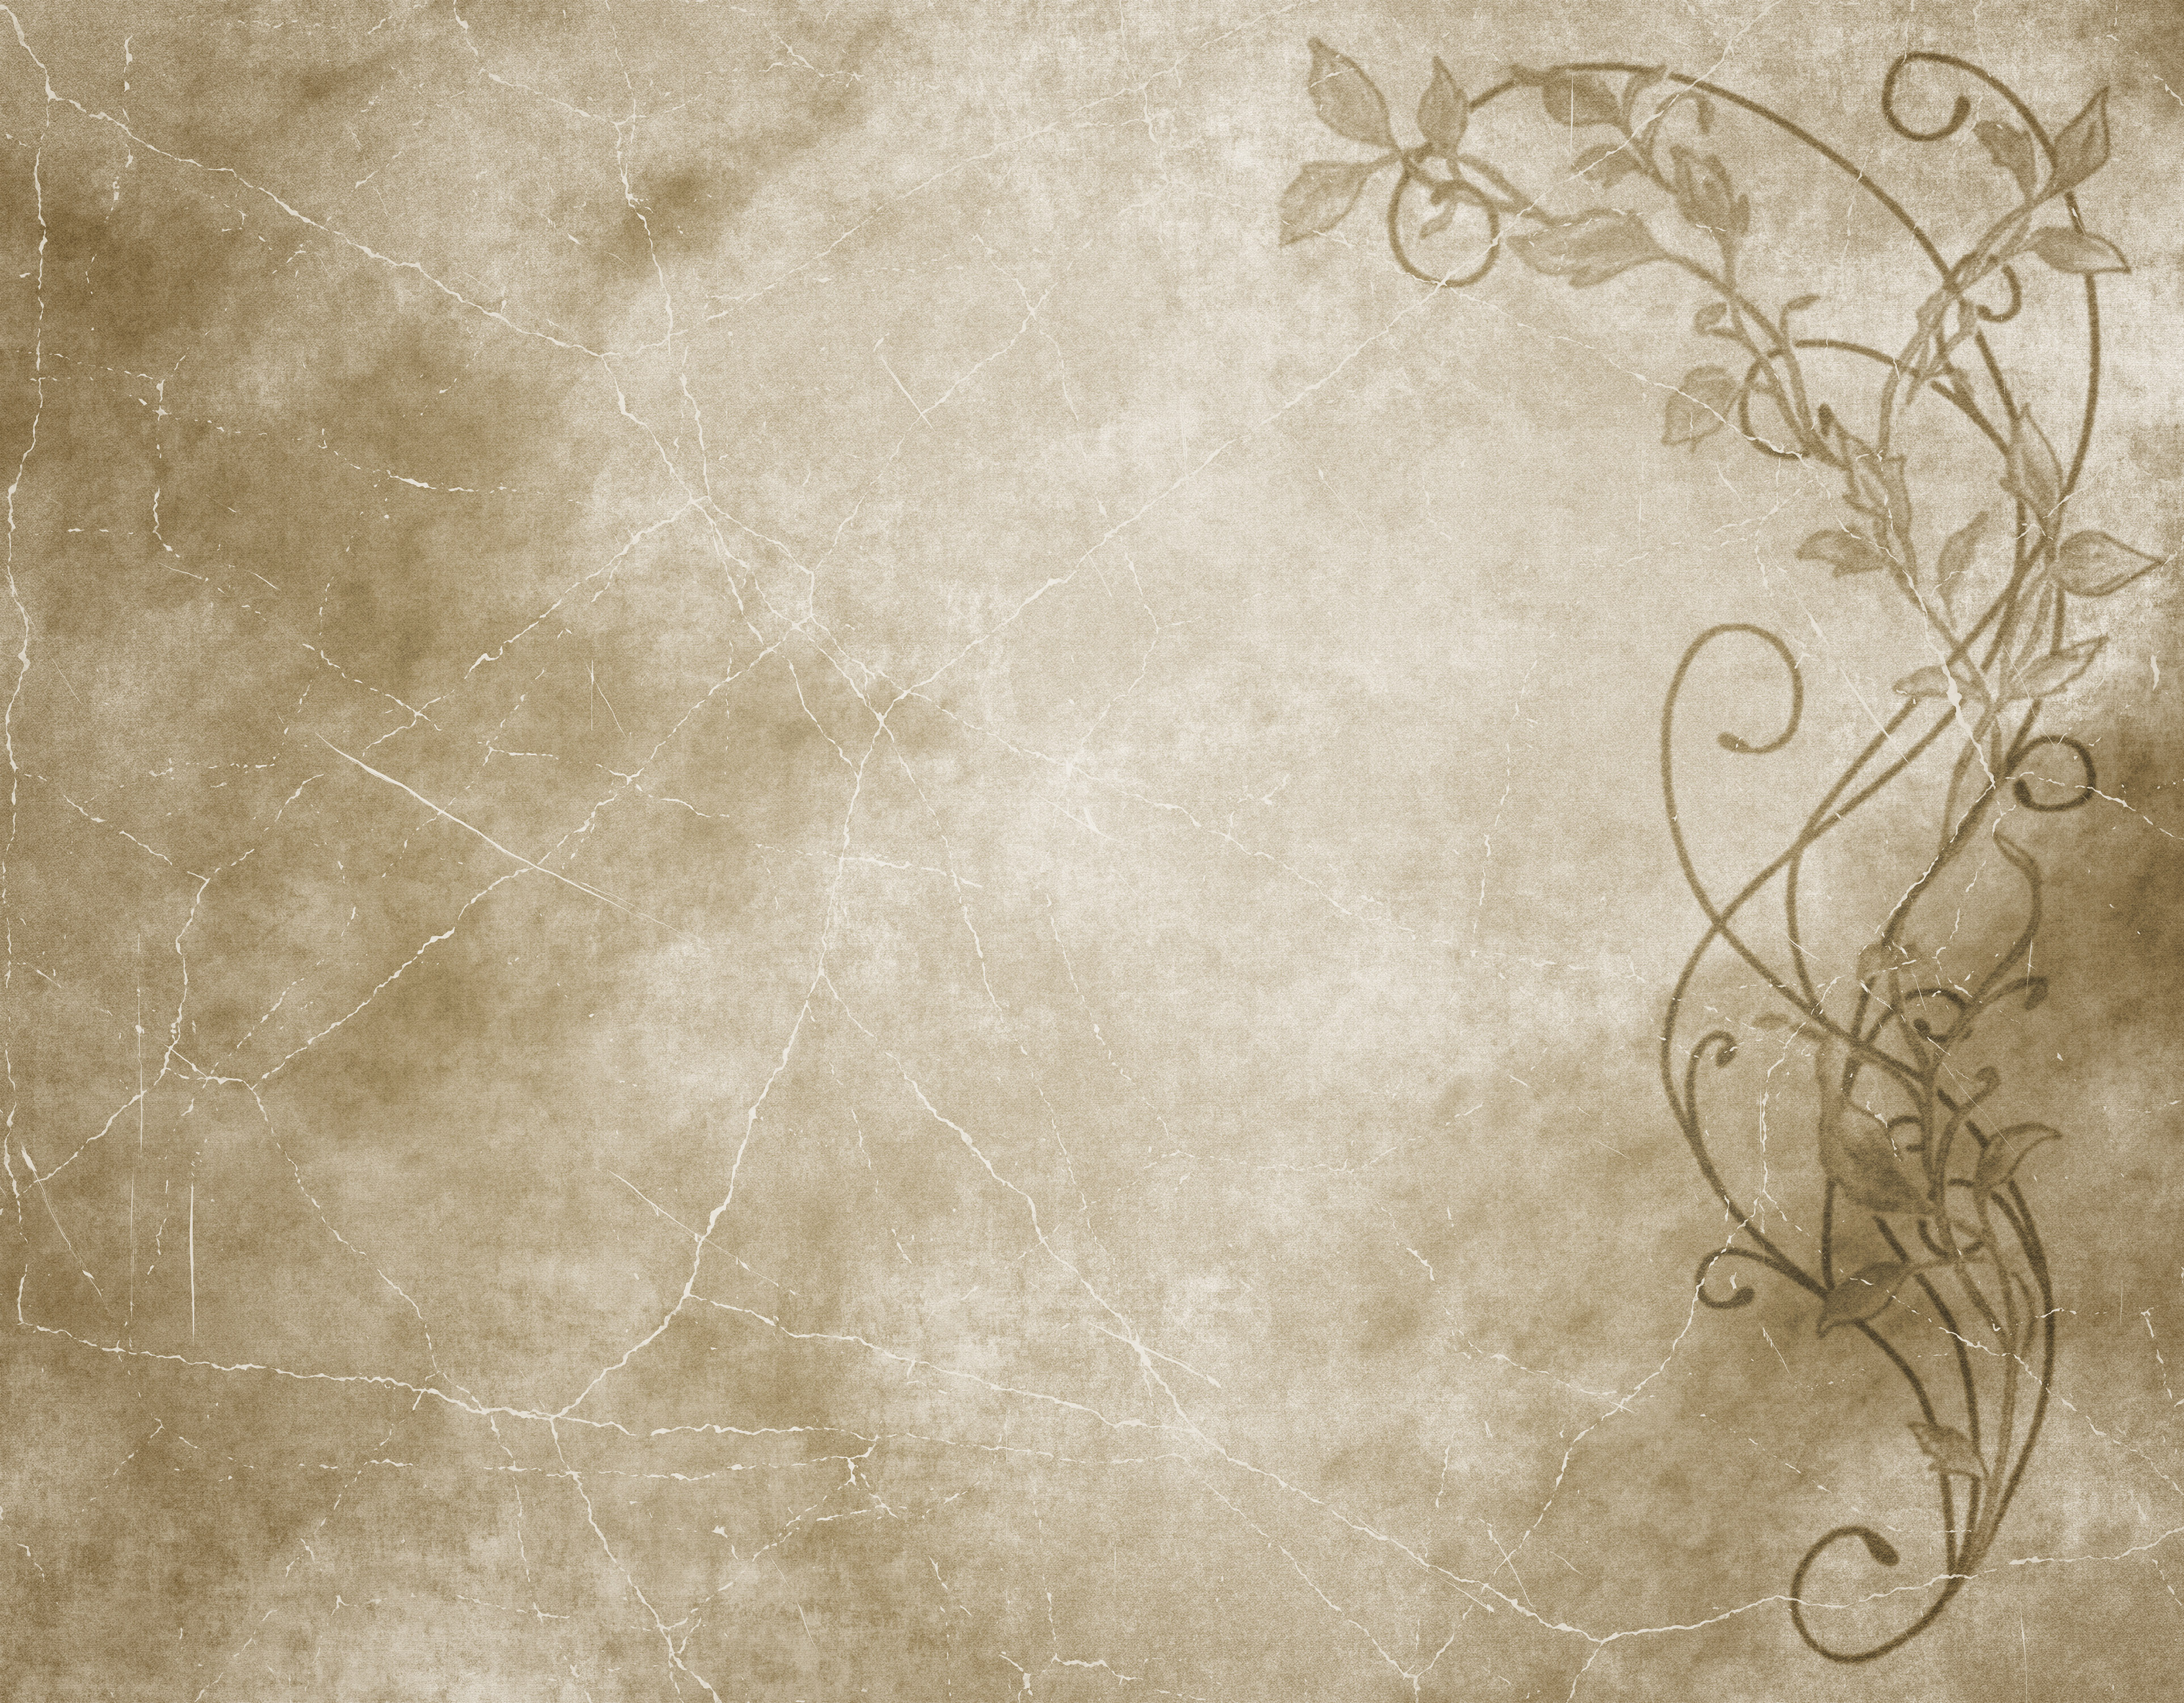 Free Old Paper Textures and Parchment Paper Backgrounds | www ...